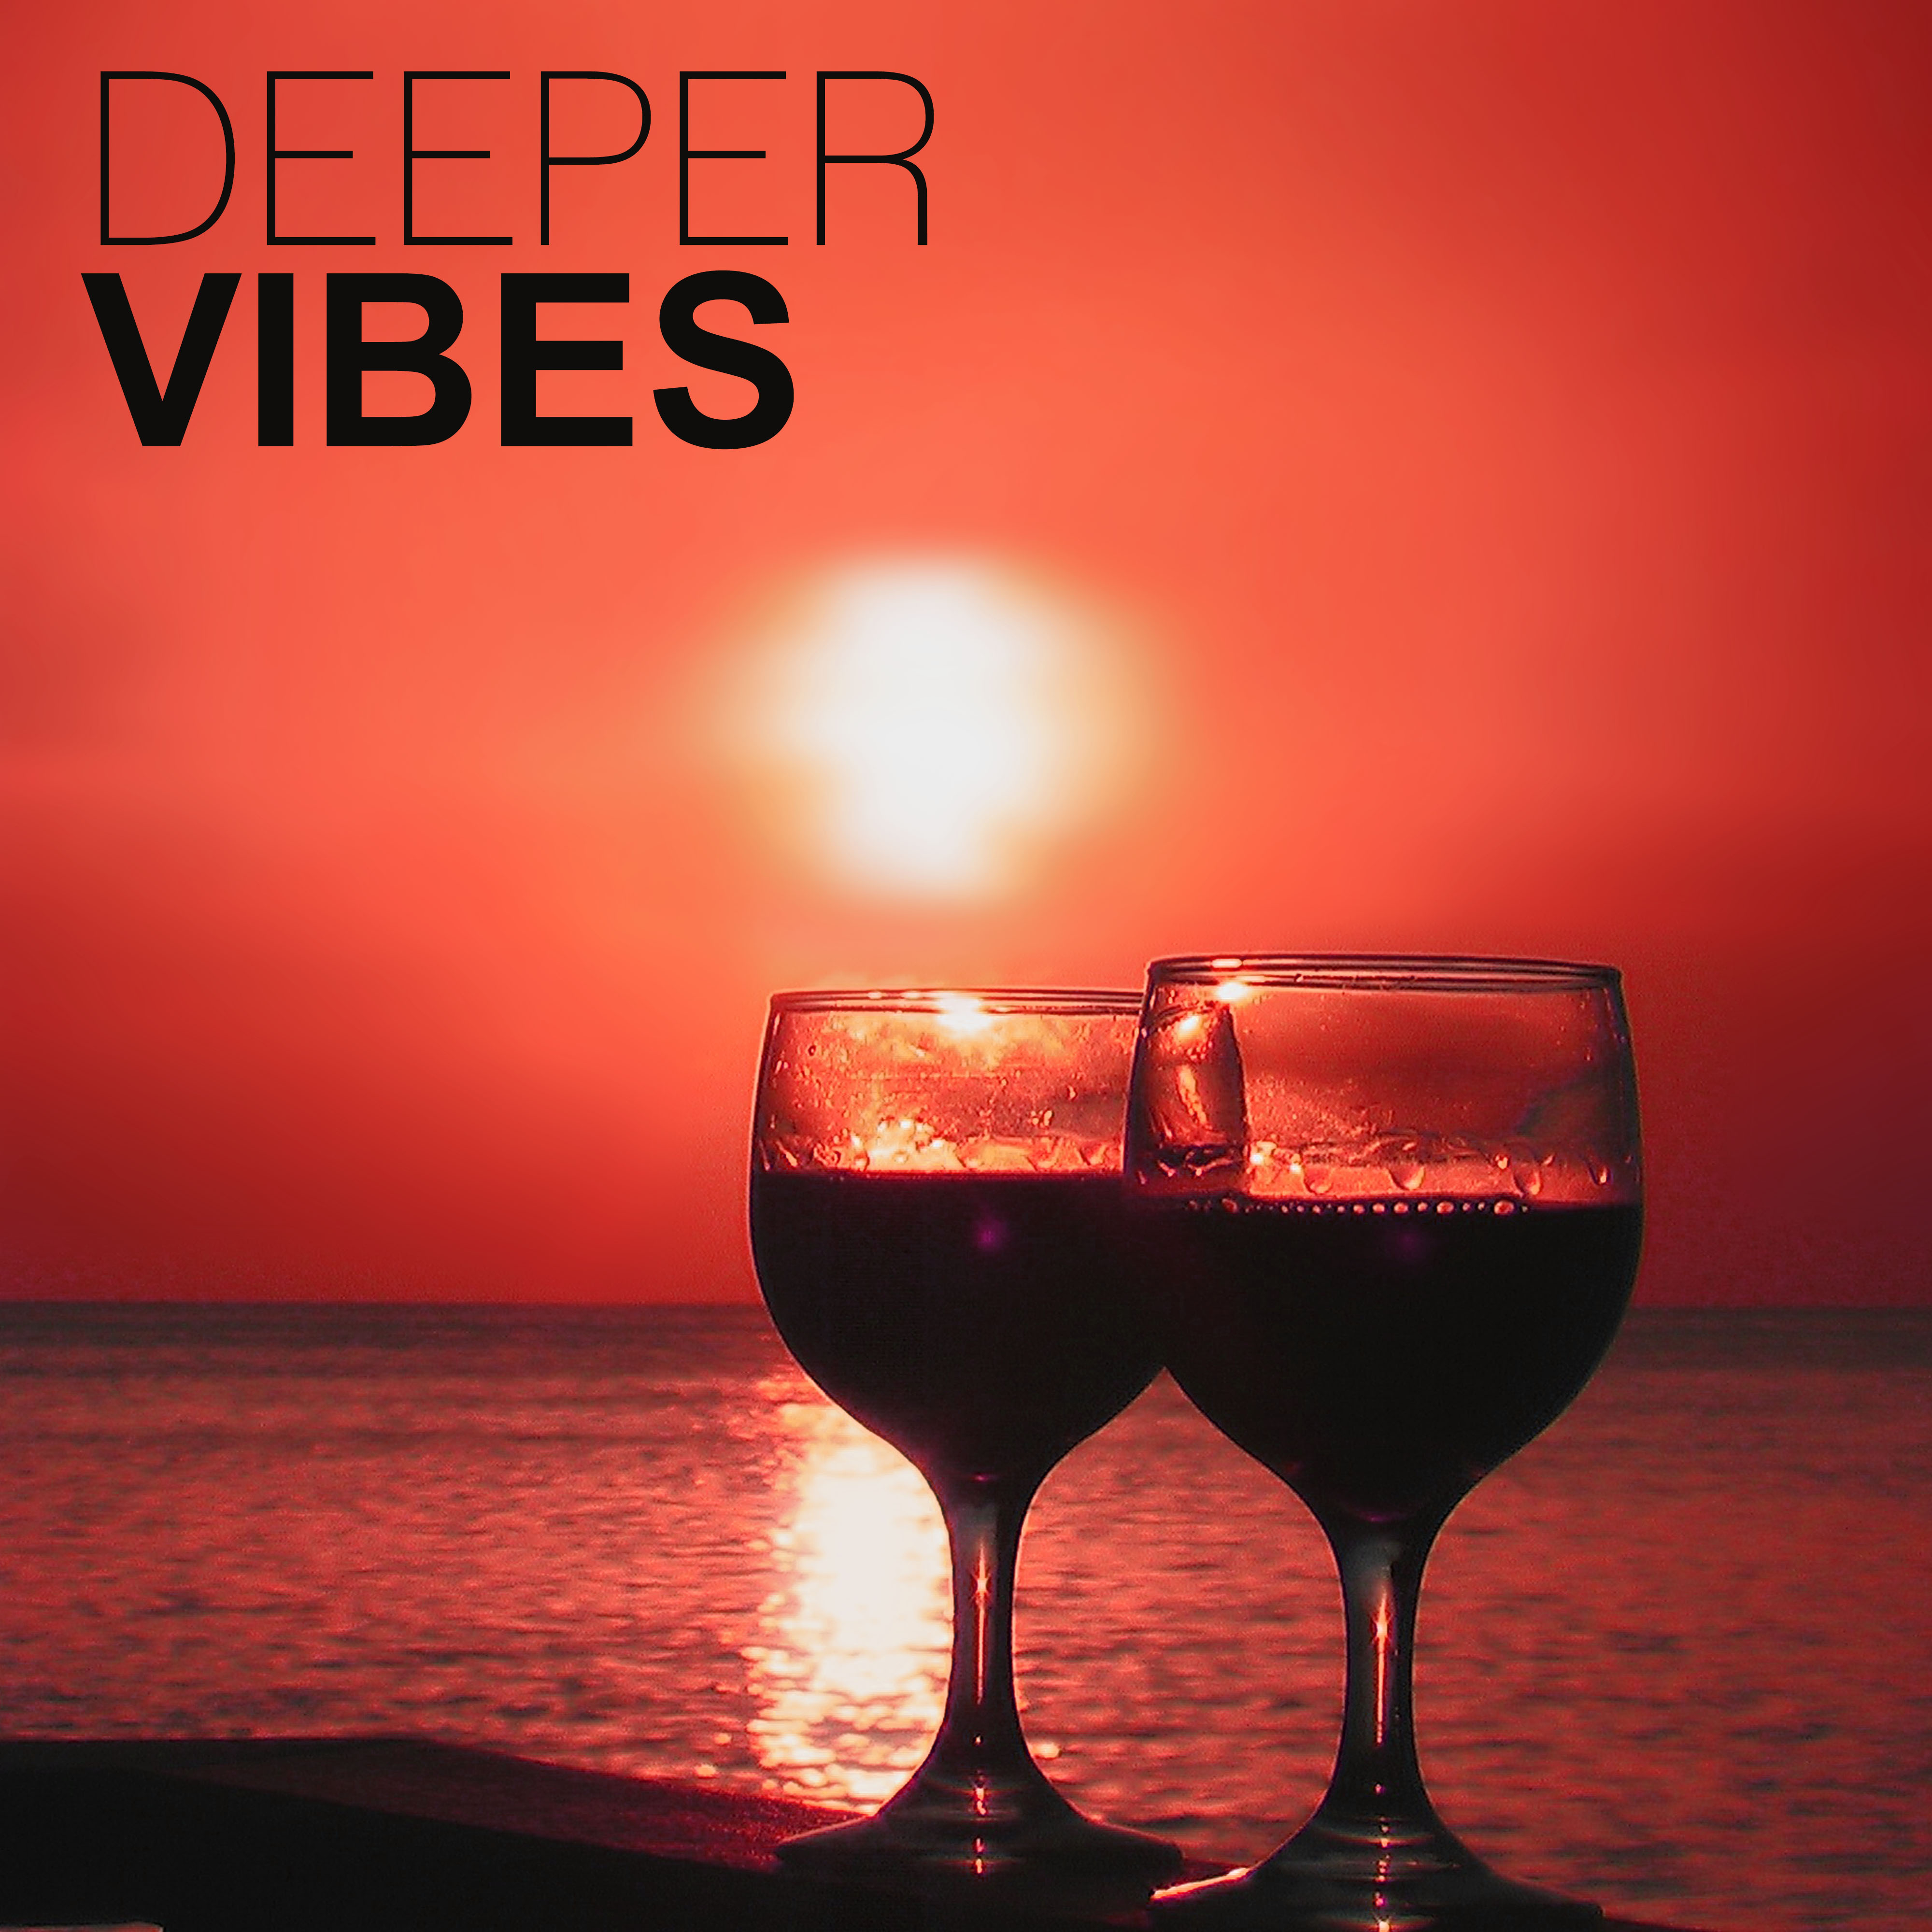 Deeper Vibes – Summertime, Chill Out Sounds, Rest